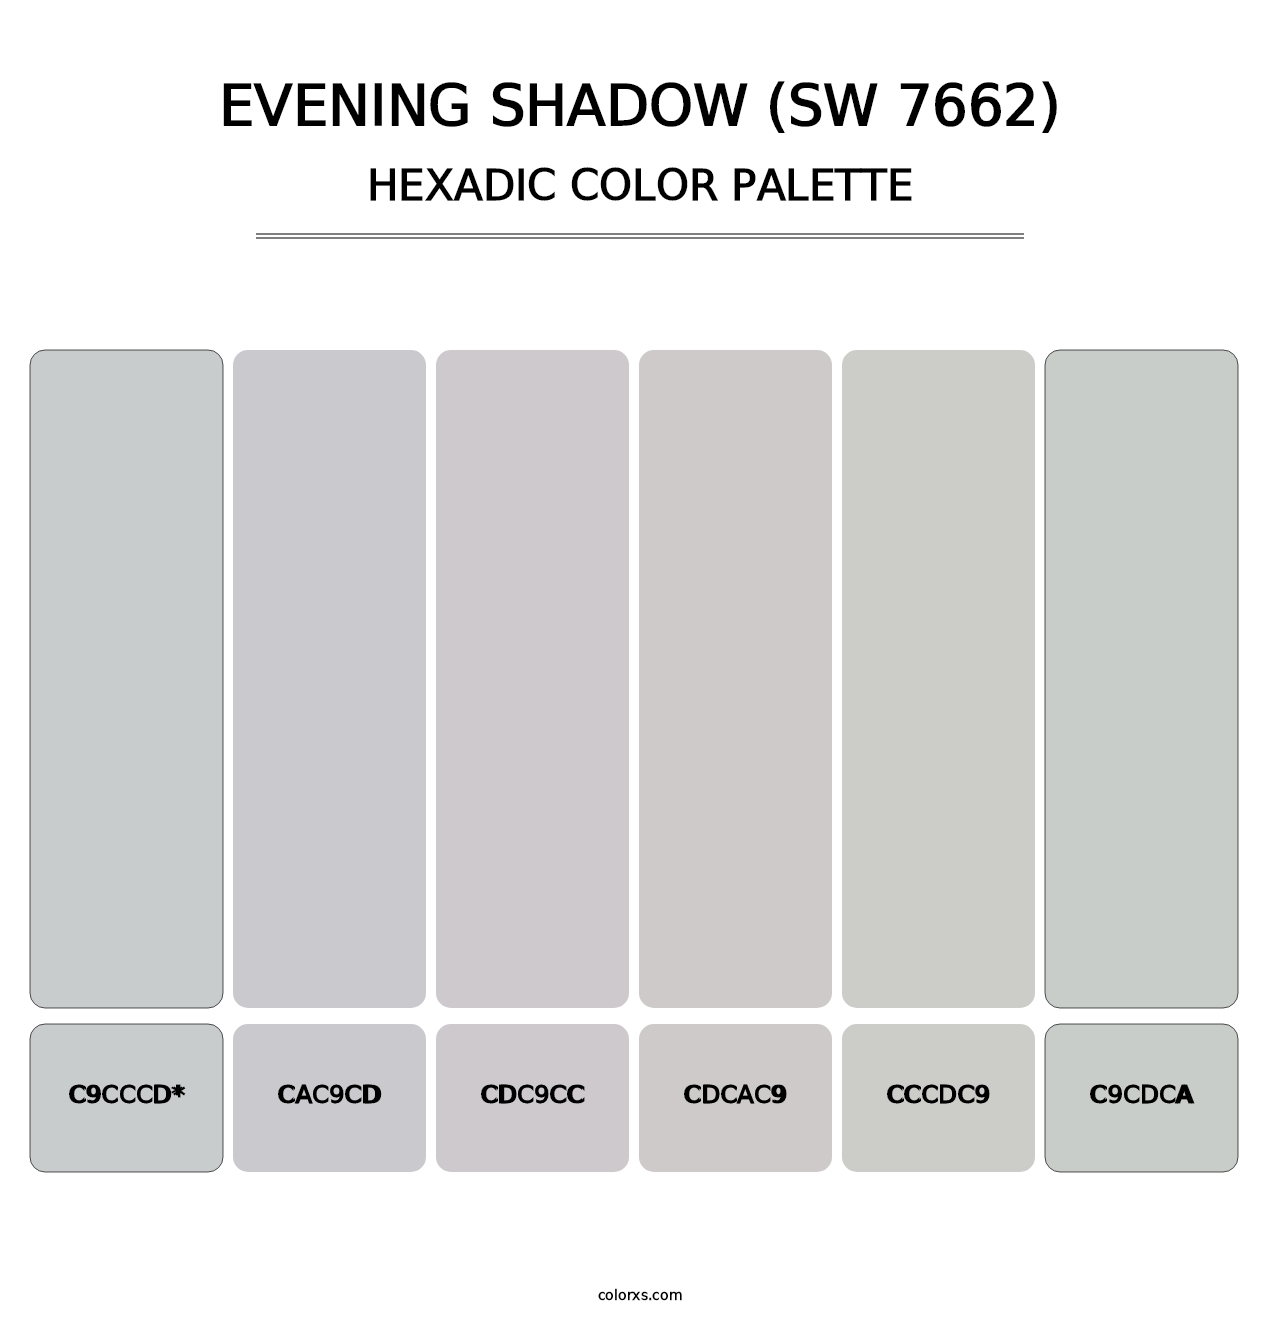 Evening Shadow (SW 7662) - Hexadic Color Palette